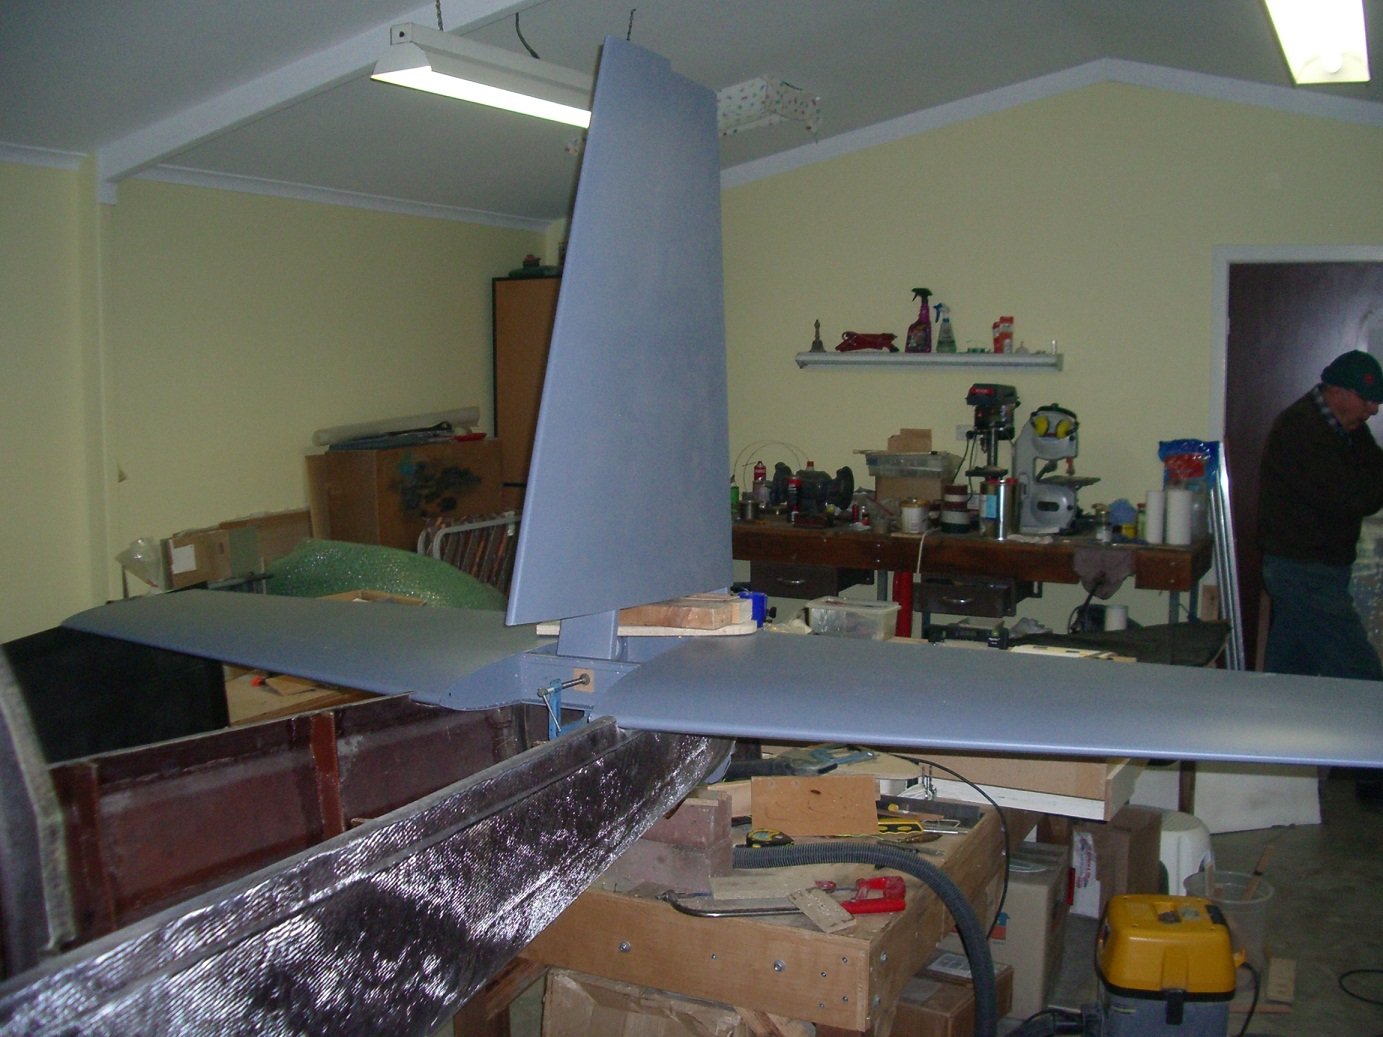 This is the RV8 tailplane being mounted to the rear fuselage.  I changed over to this tailplane so A. it has more tail volume and B. it is made of met